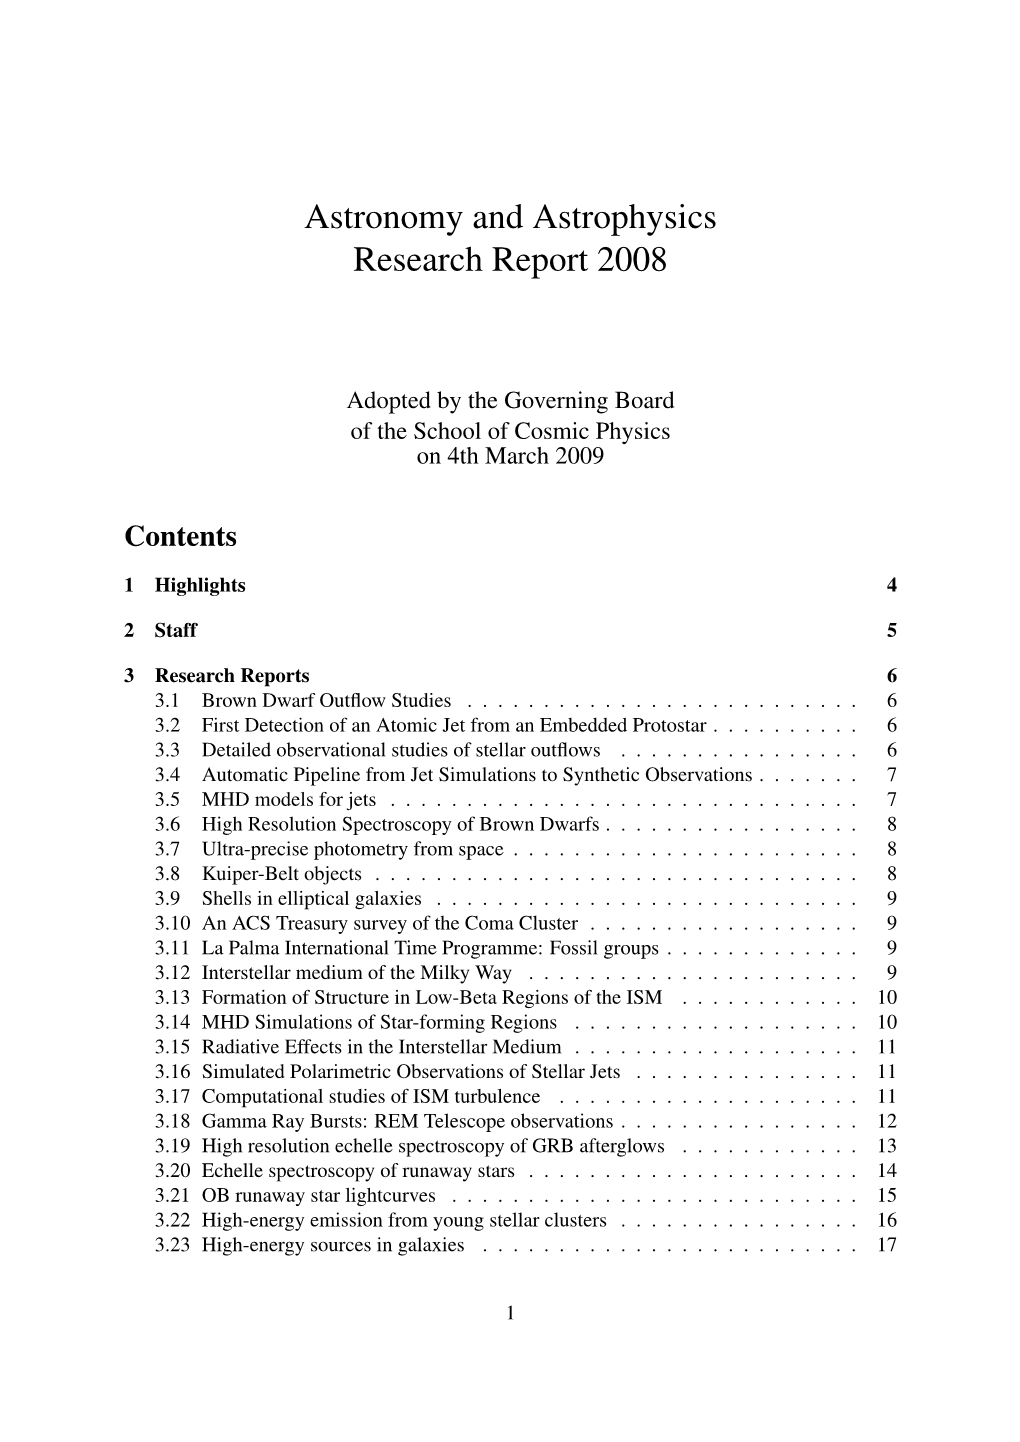 Astronomy and Astrophysics Research Report 2008